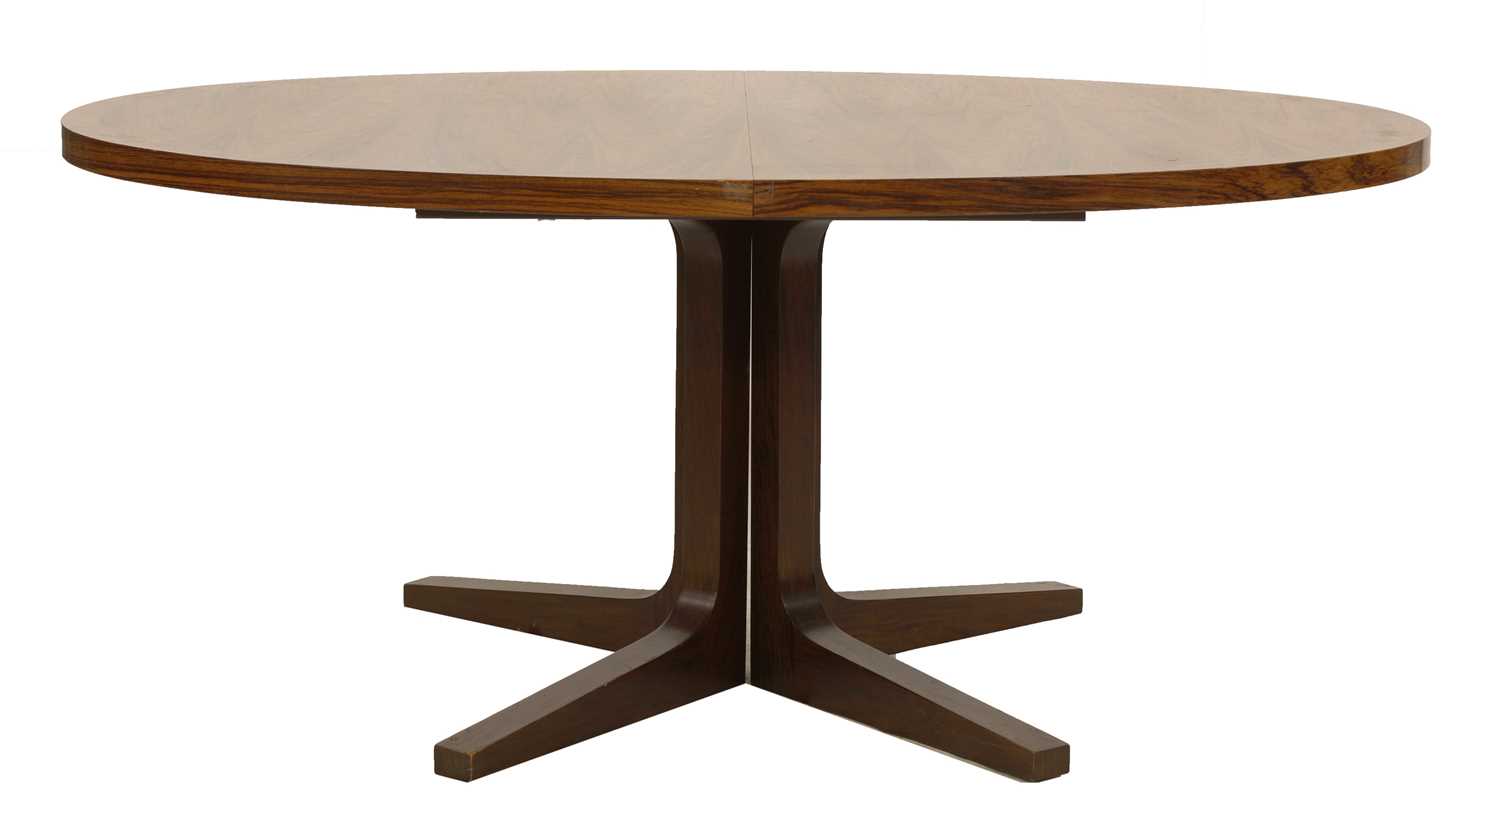 Lot 493 - A Danish Dyrlund rosewood extending dining table